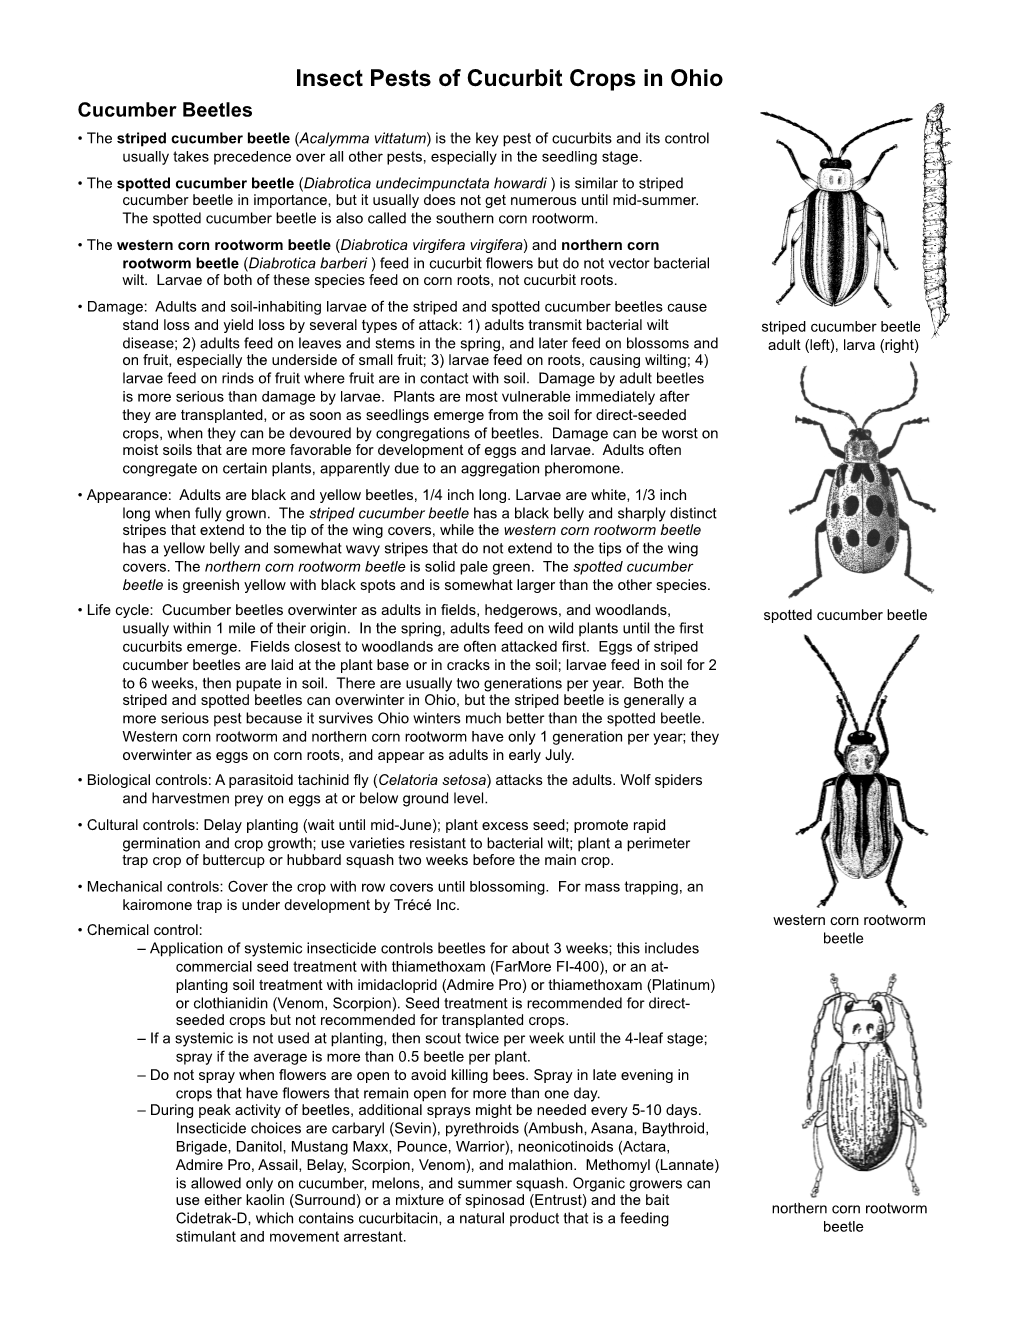 Insect Pests of Cucurbit Crops in Ohio